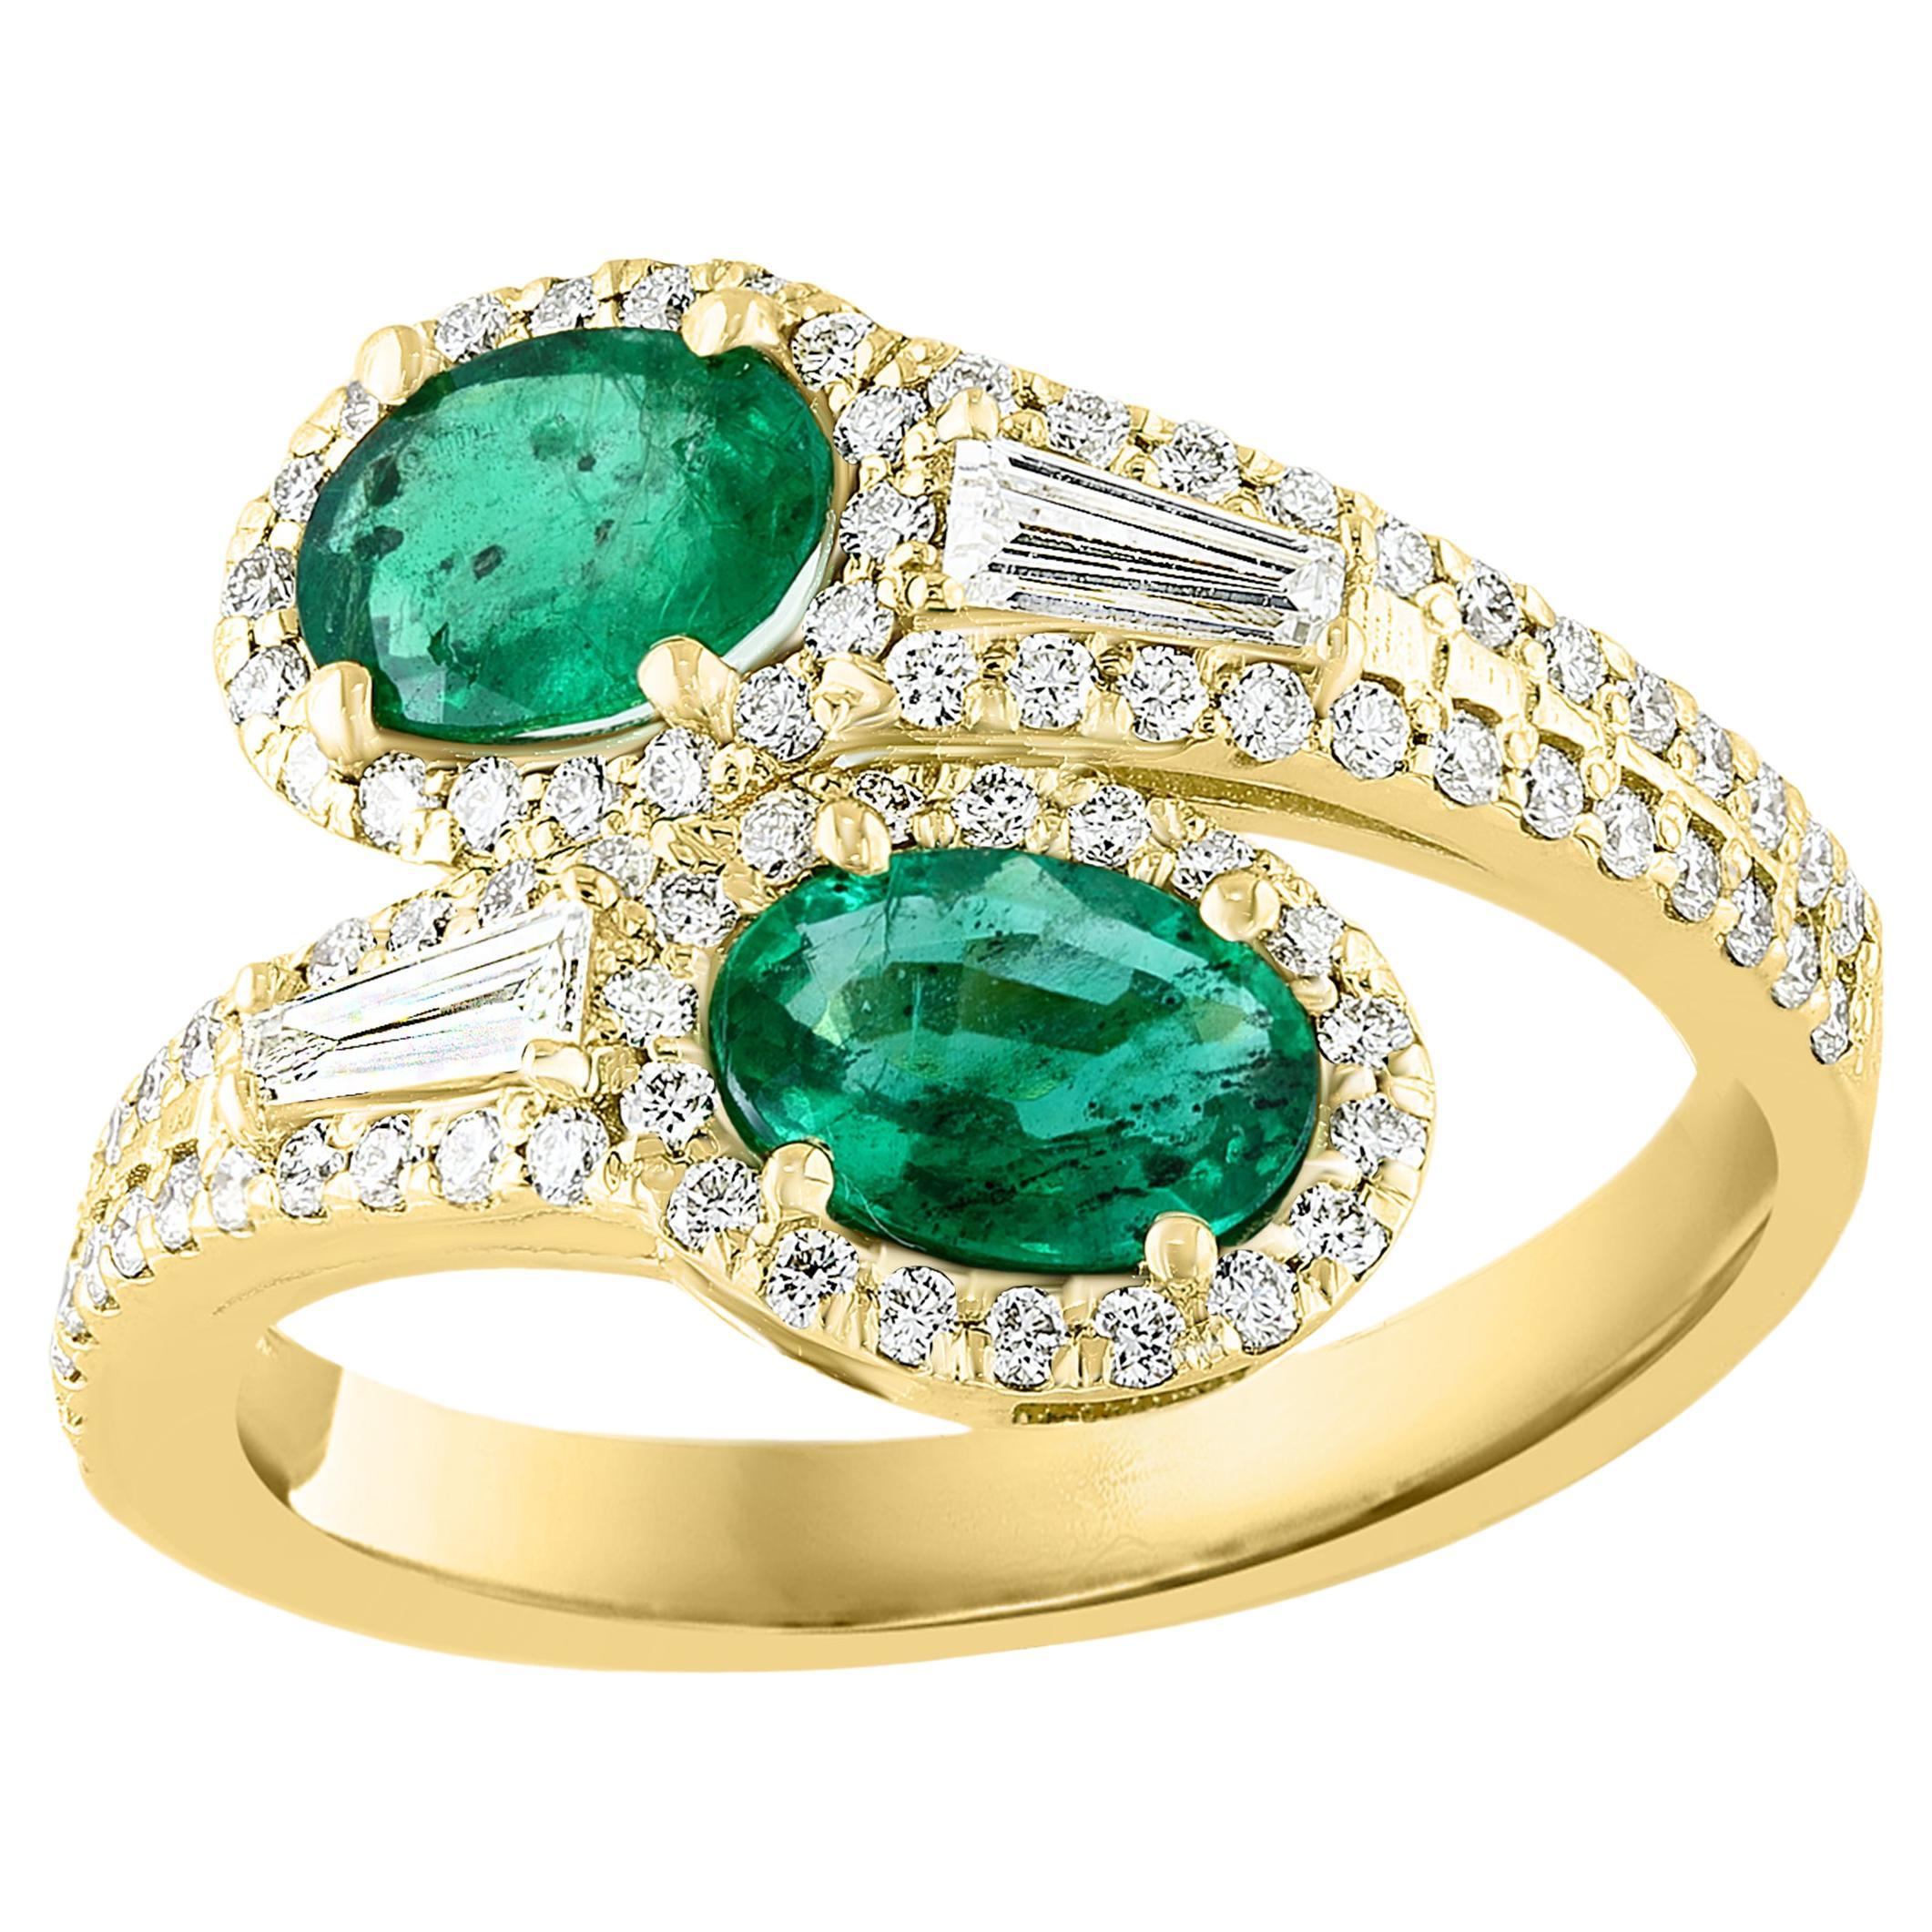 1.52 Carat Oval Cut Emerald Diamond Toi Et Moi Engagement Ring 14K Yellow Gold For Sale